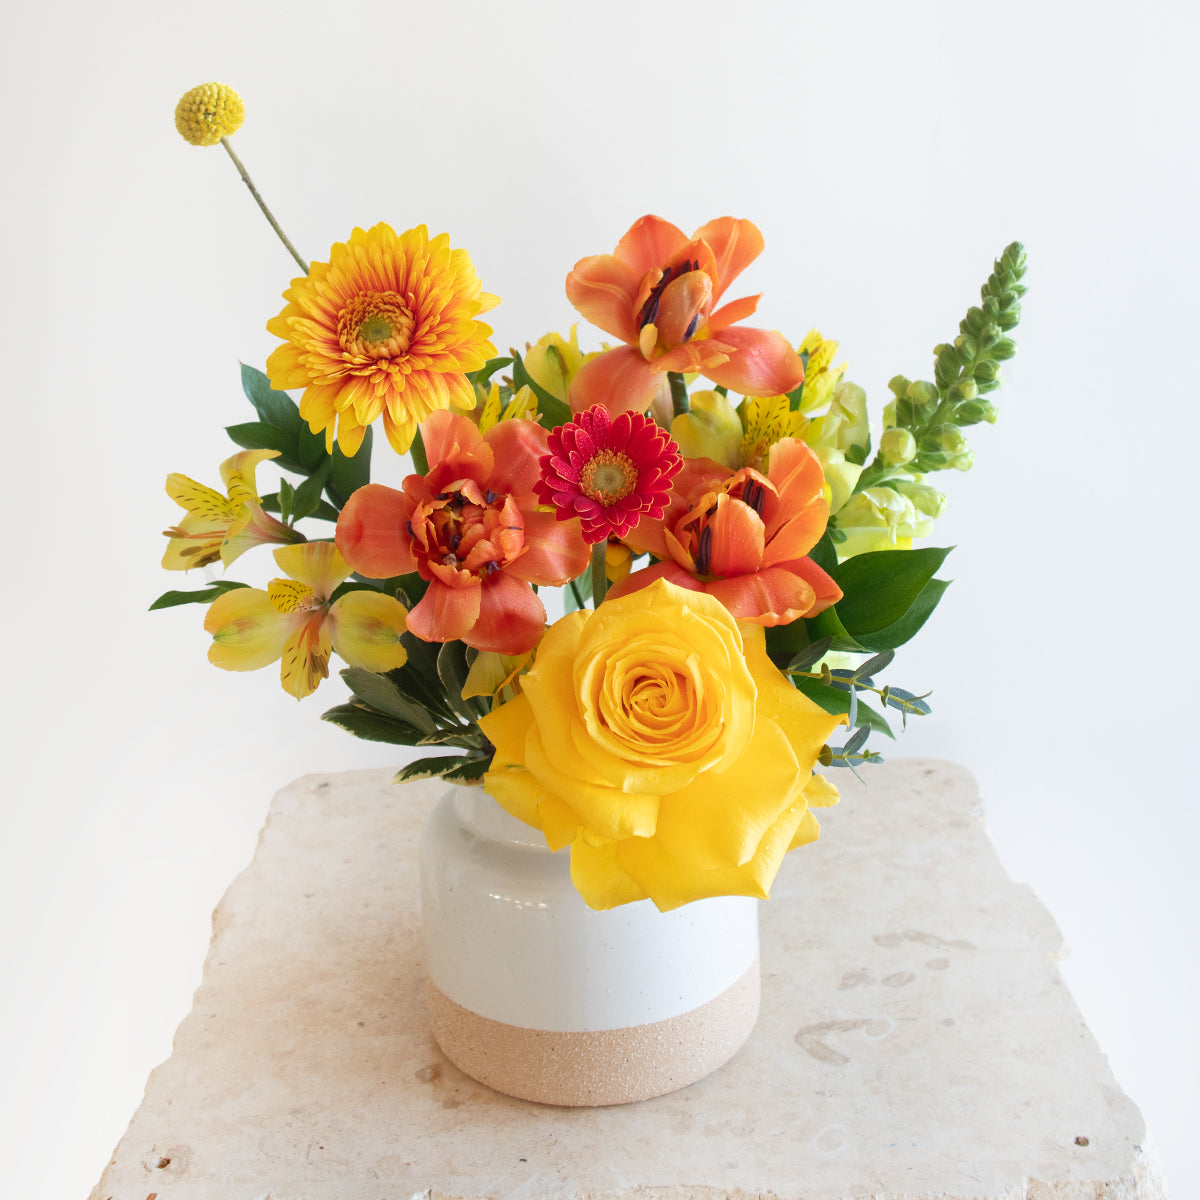 Designer Blooms Choice Vase - Bright and Cheerful